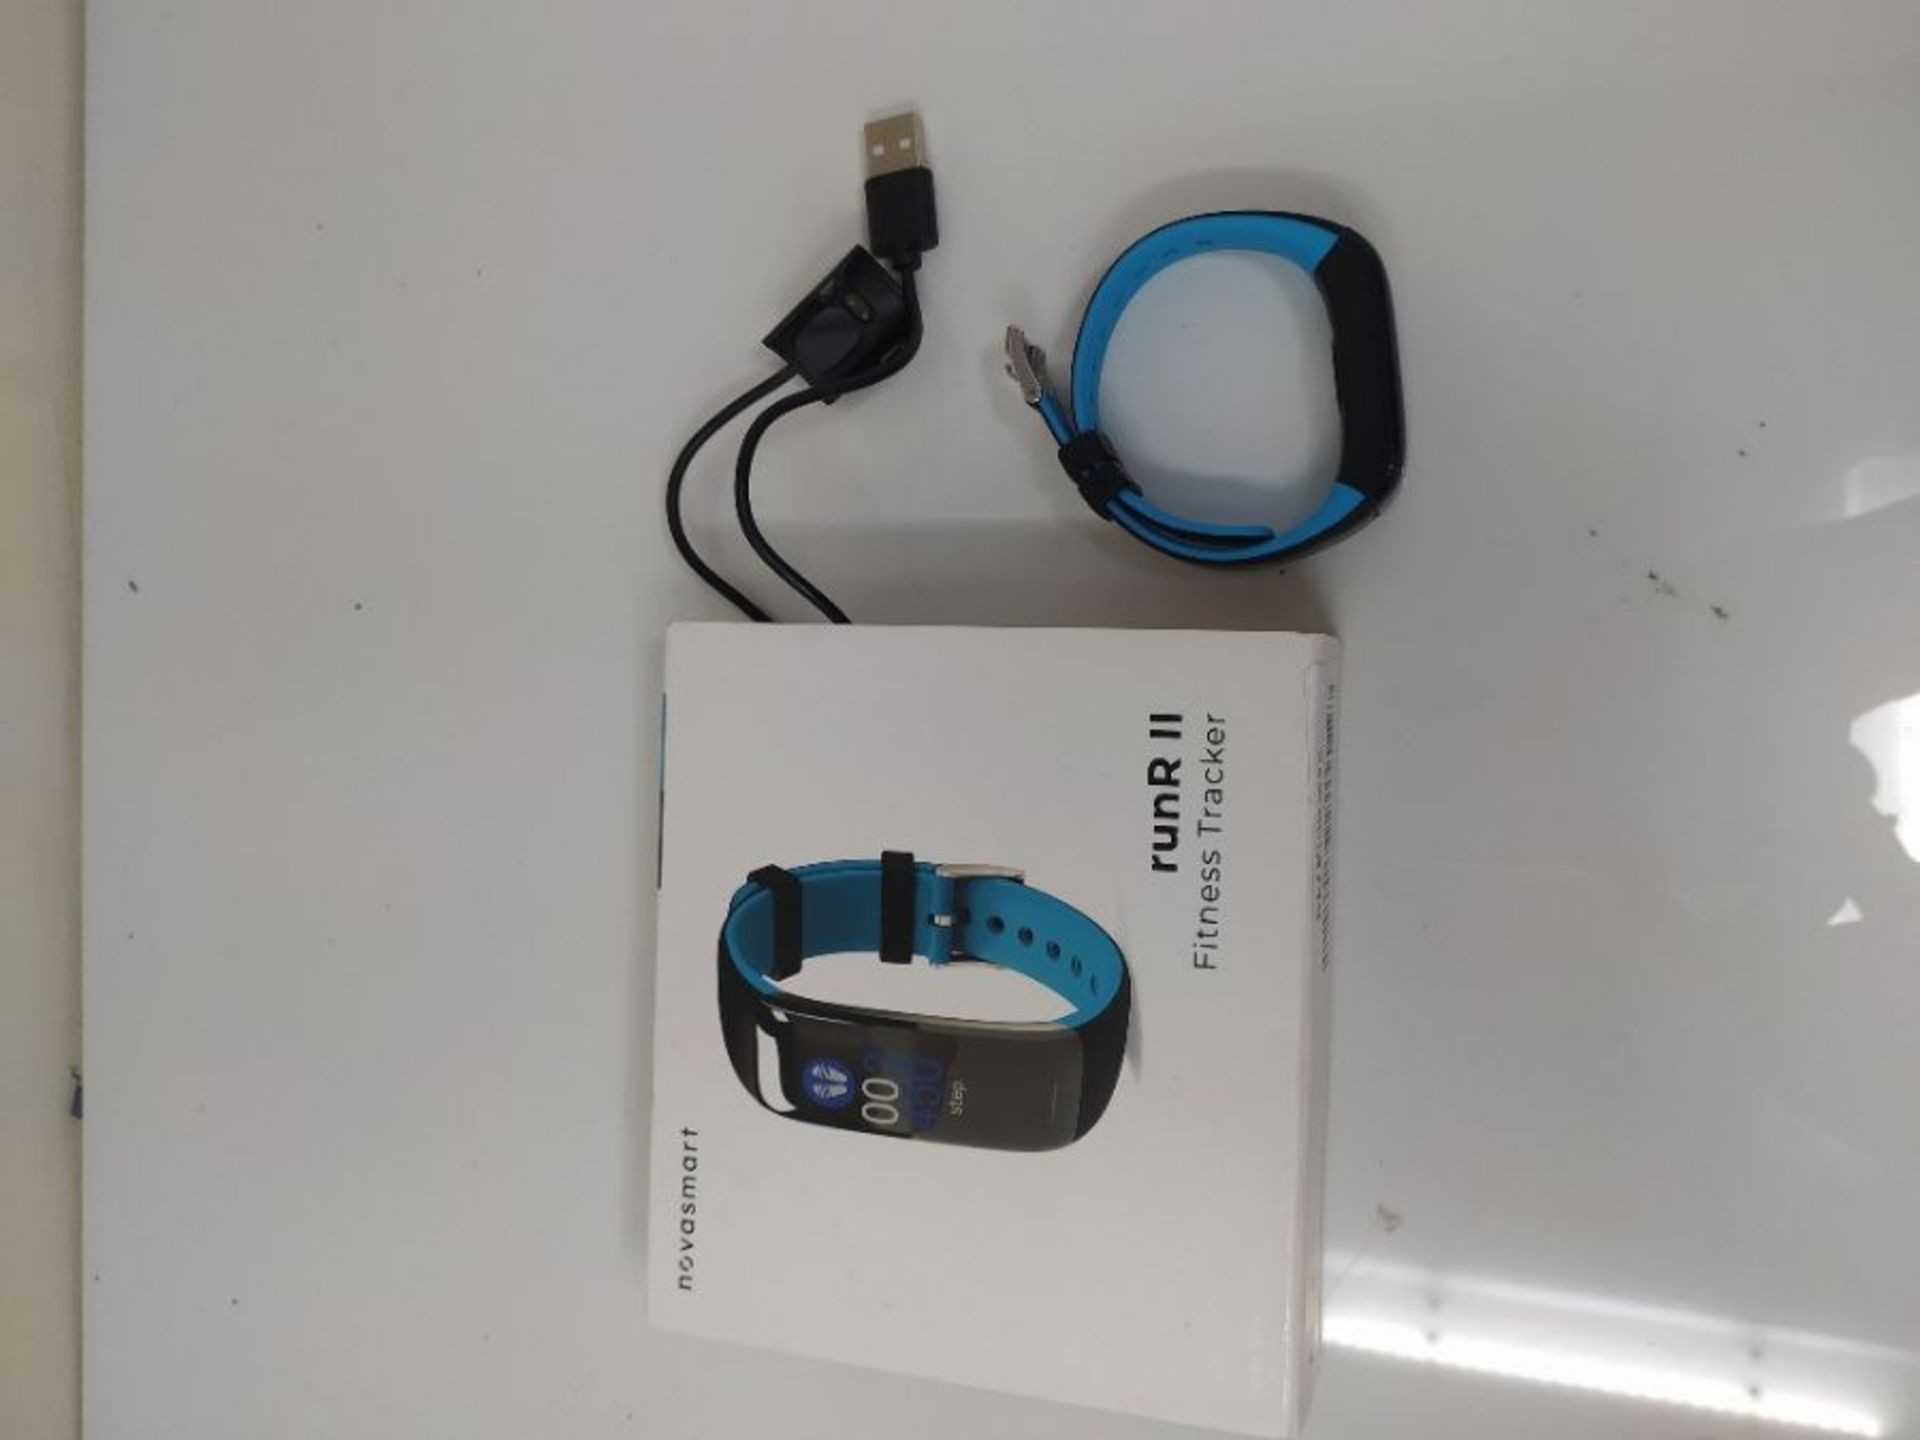 novasmart - runR II Fitness Tracker, Activity Tracker, Smart Band with Colour Display, - Image 2 of 2